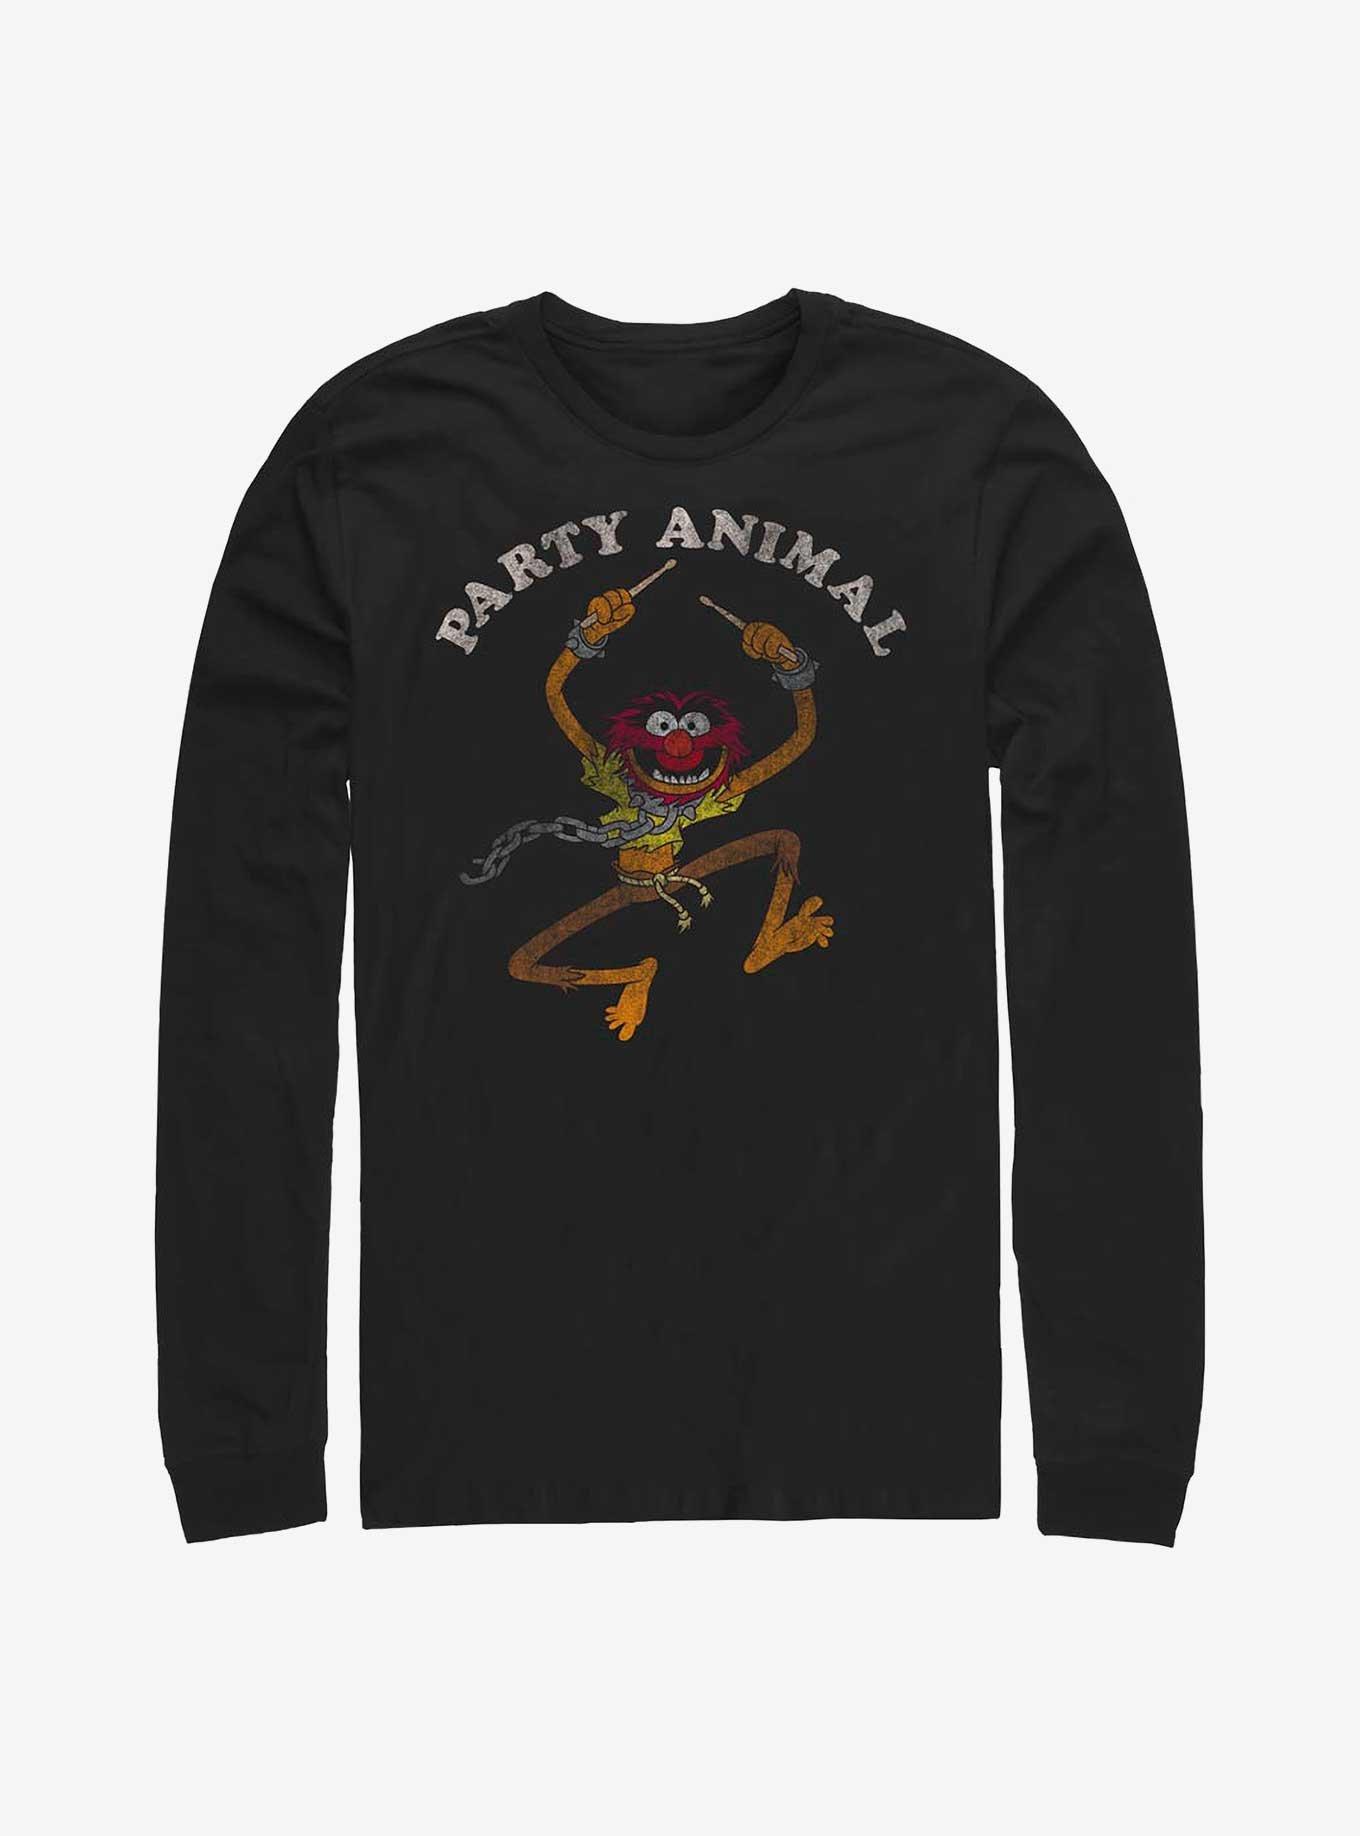 Disney The Muppets Party Animal Long Sleeve T-Shirt, BLACK, hi-res